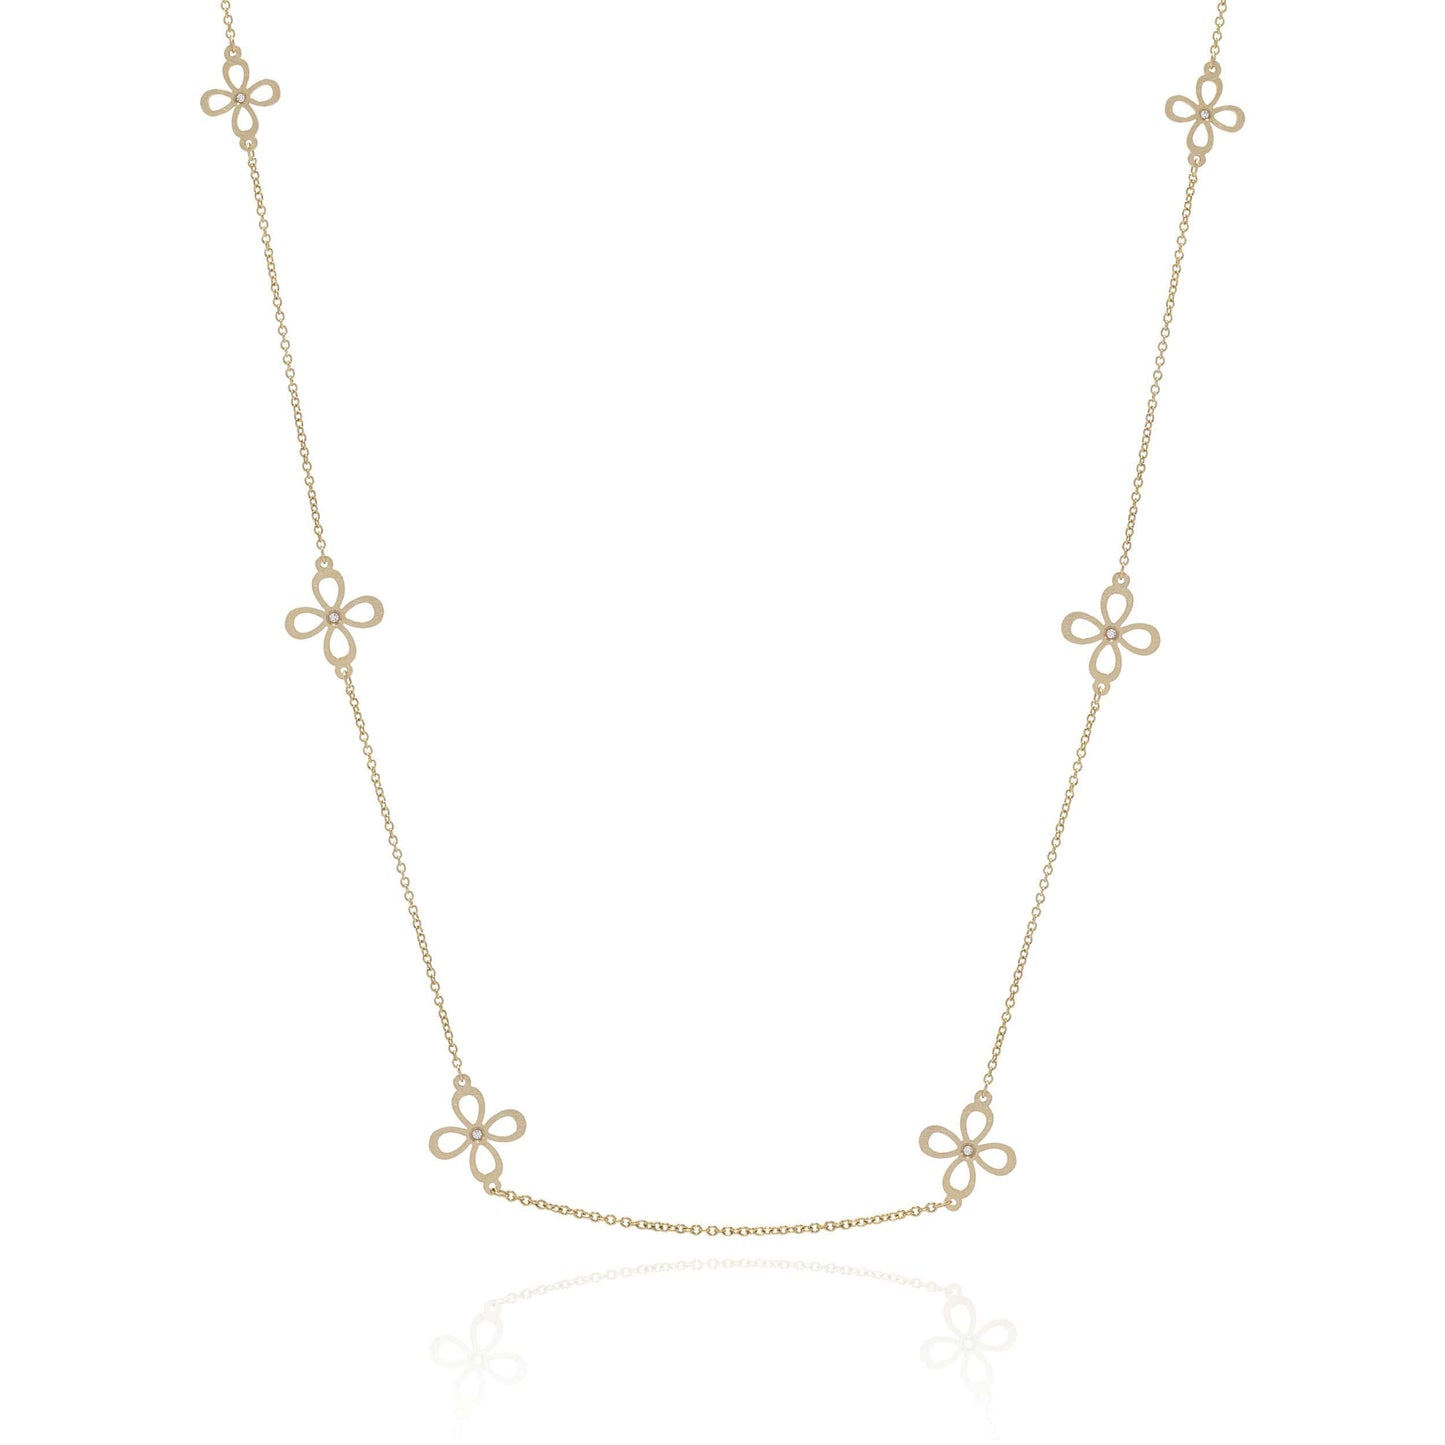 Dalia T Online Necklace Nature Collection 14KT Yellow Gold & Diamonds long Flower Necklace